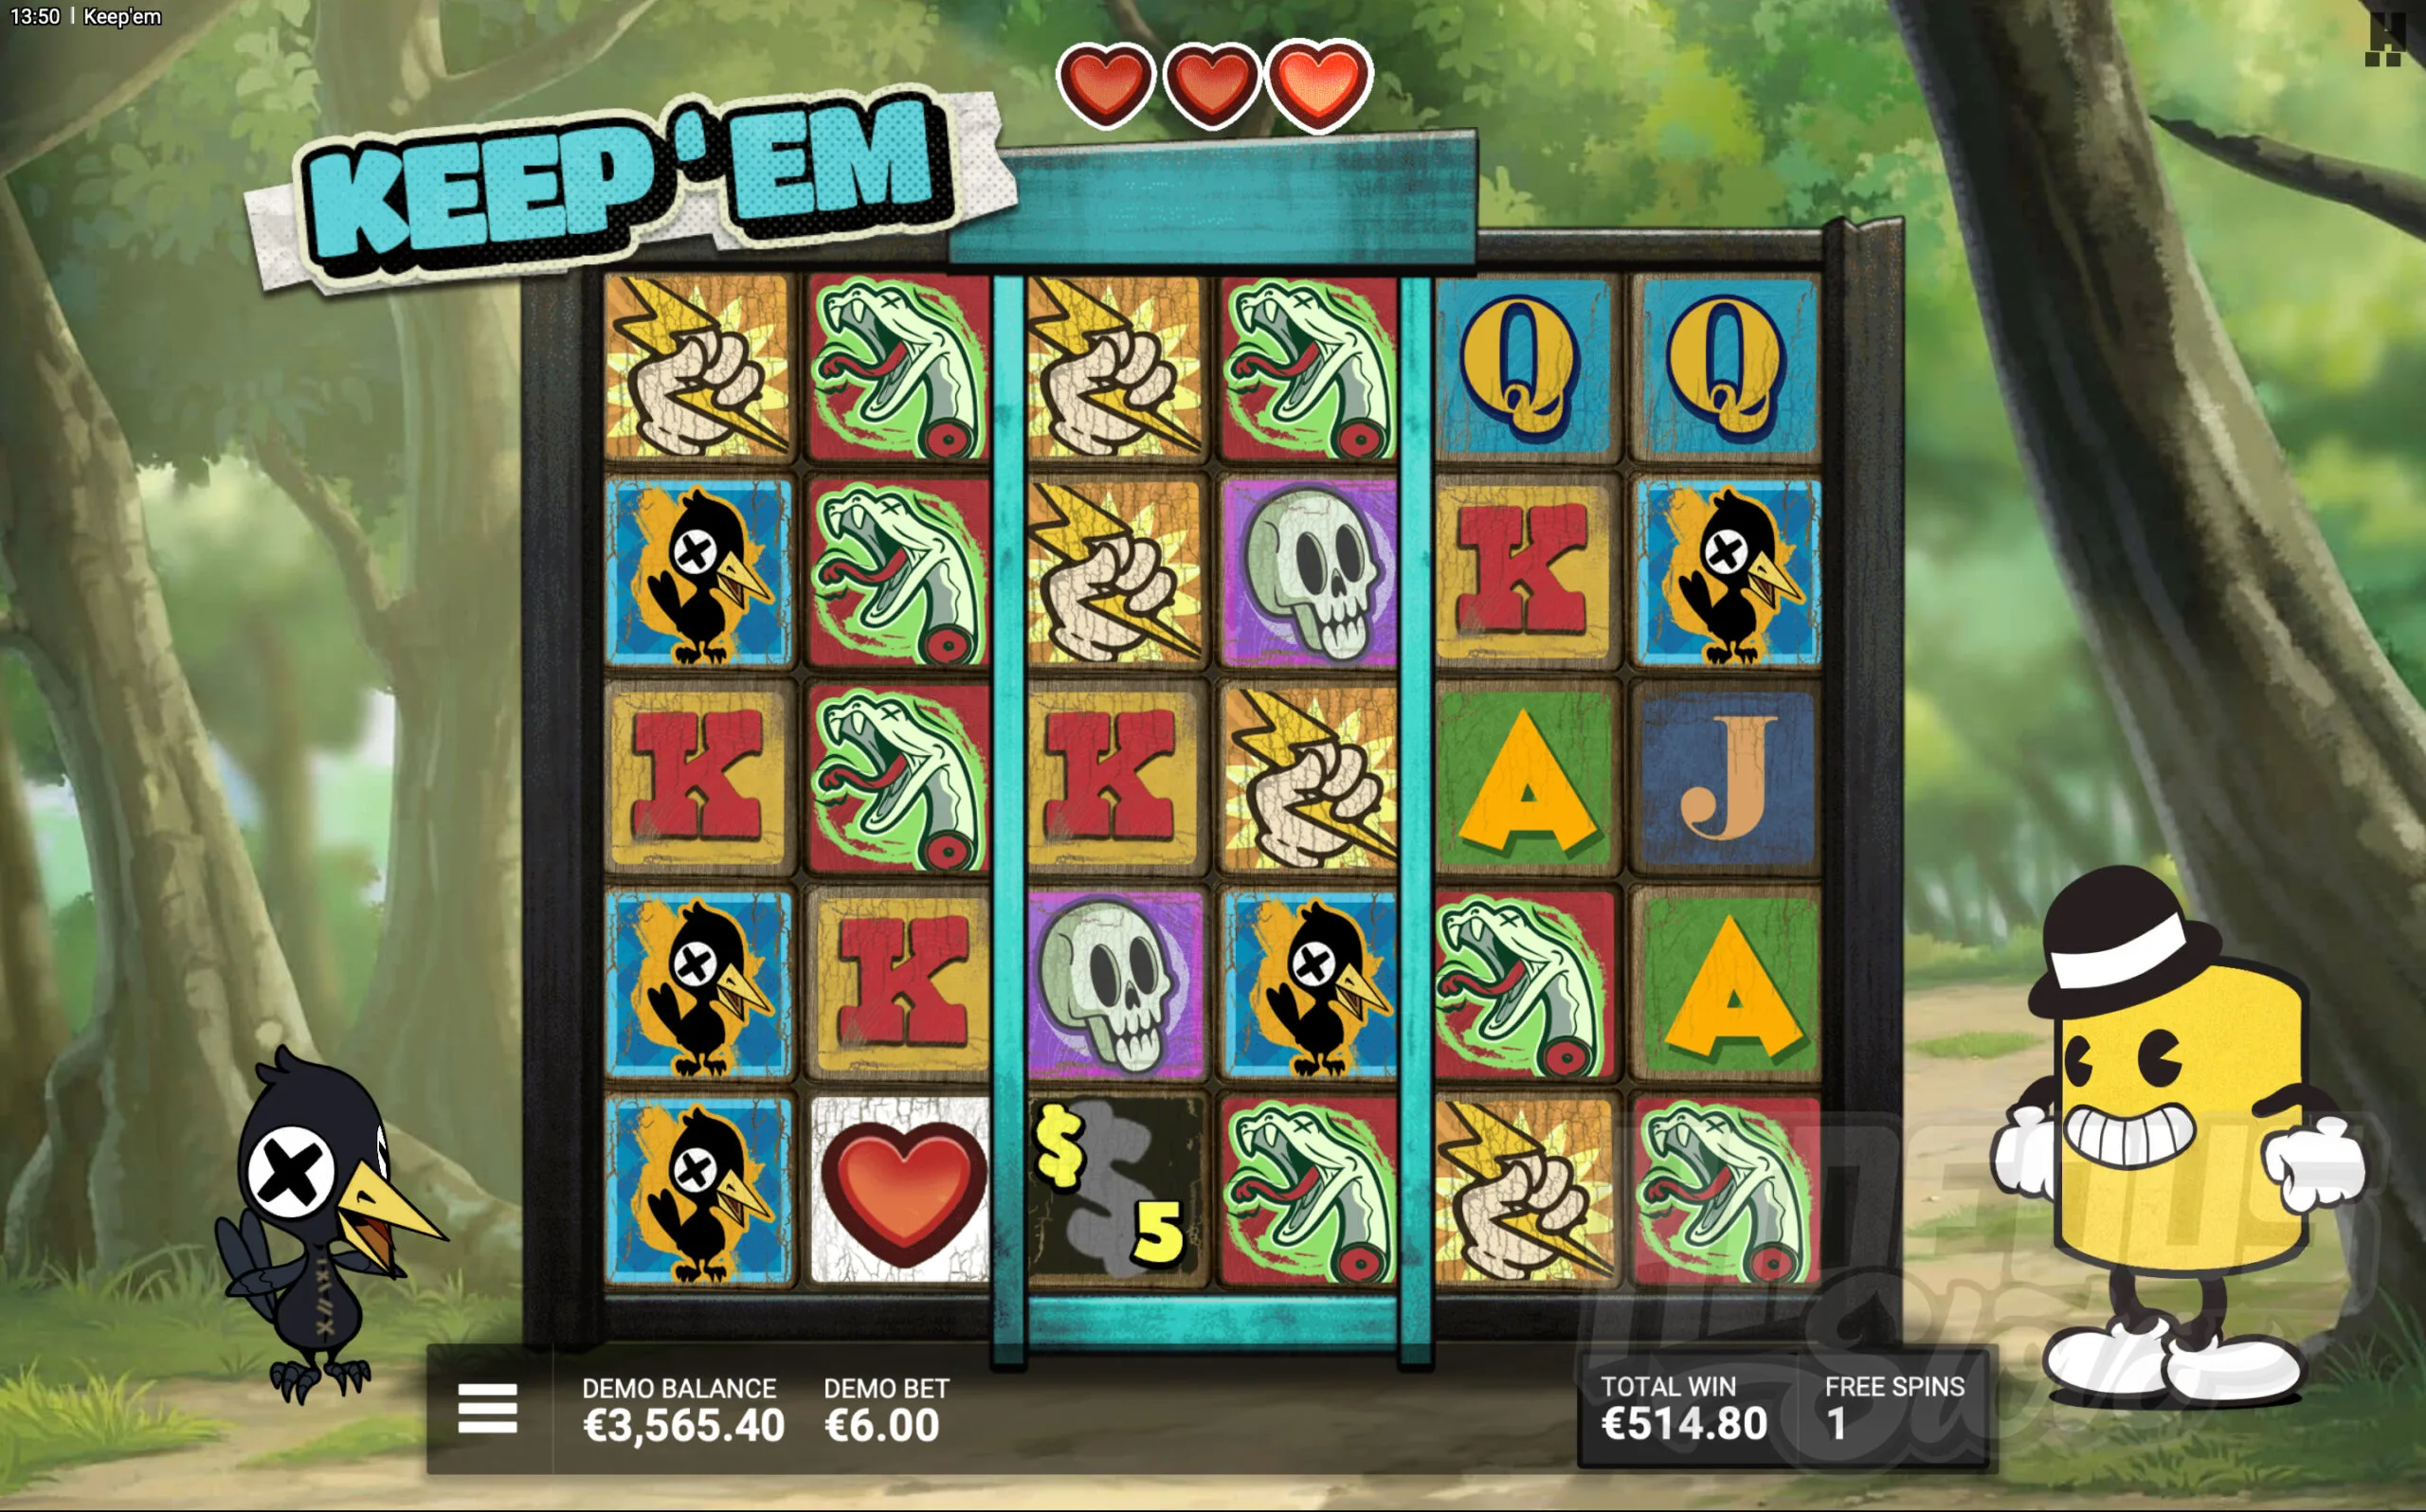 Land Heart Symbols in the Base Game or Free Spins to Refill the Heart Counter